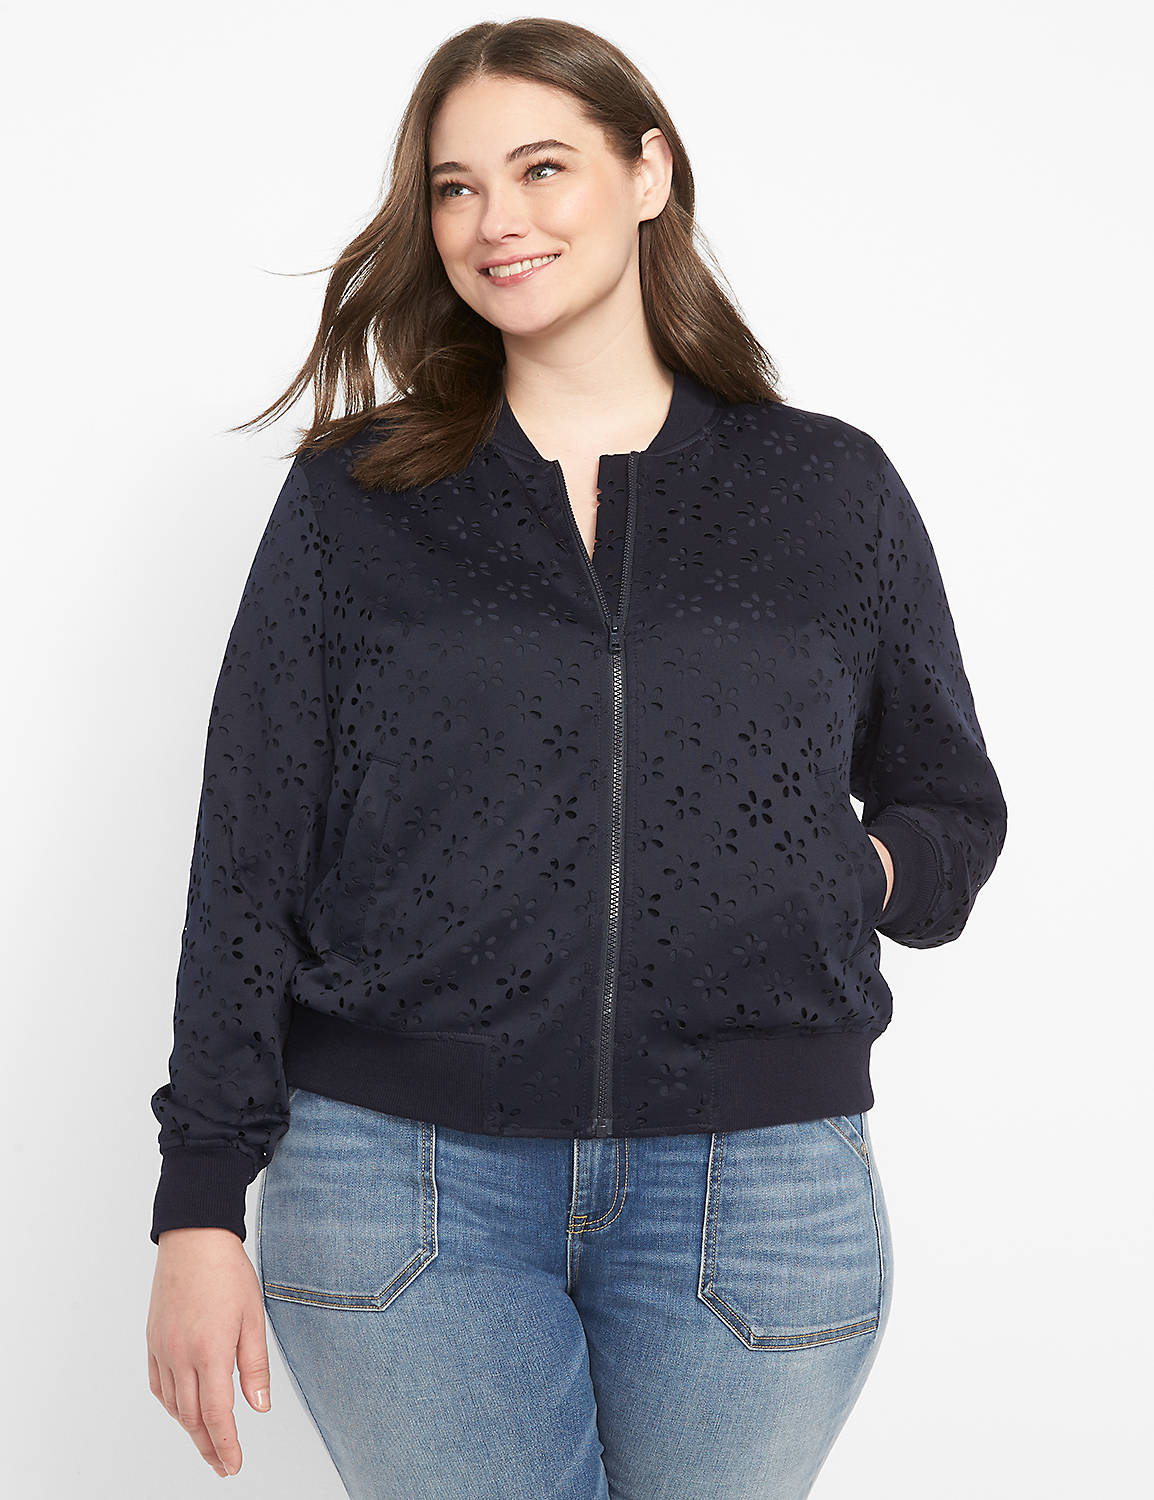 On-The-Go Laser Cut Bomber 1125200 Product Image 4